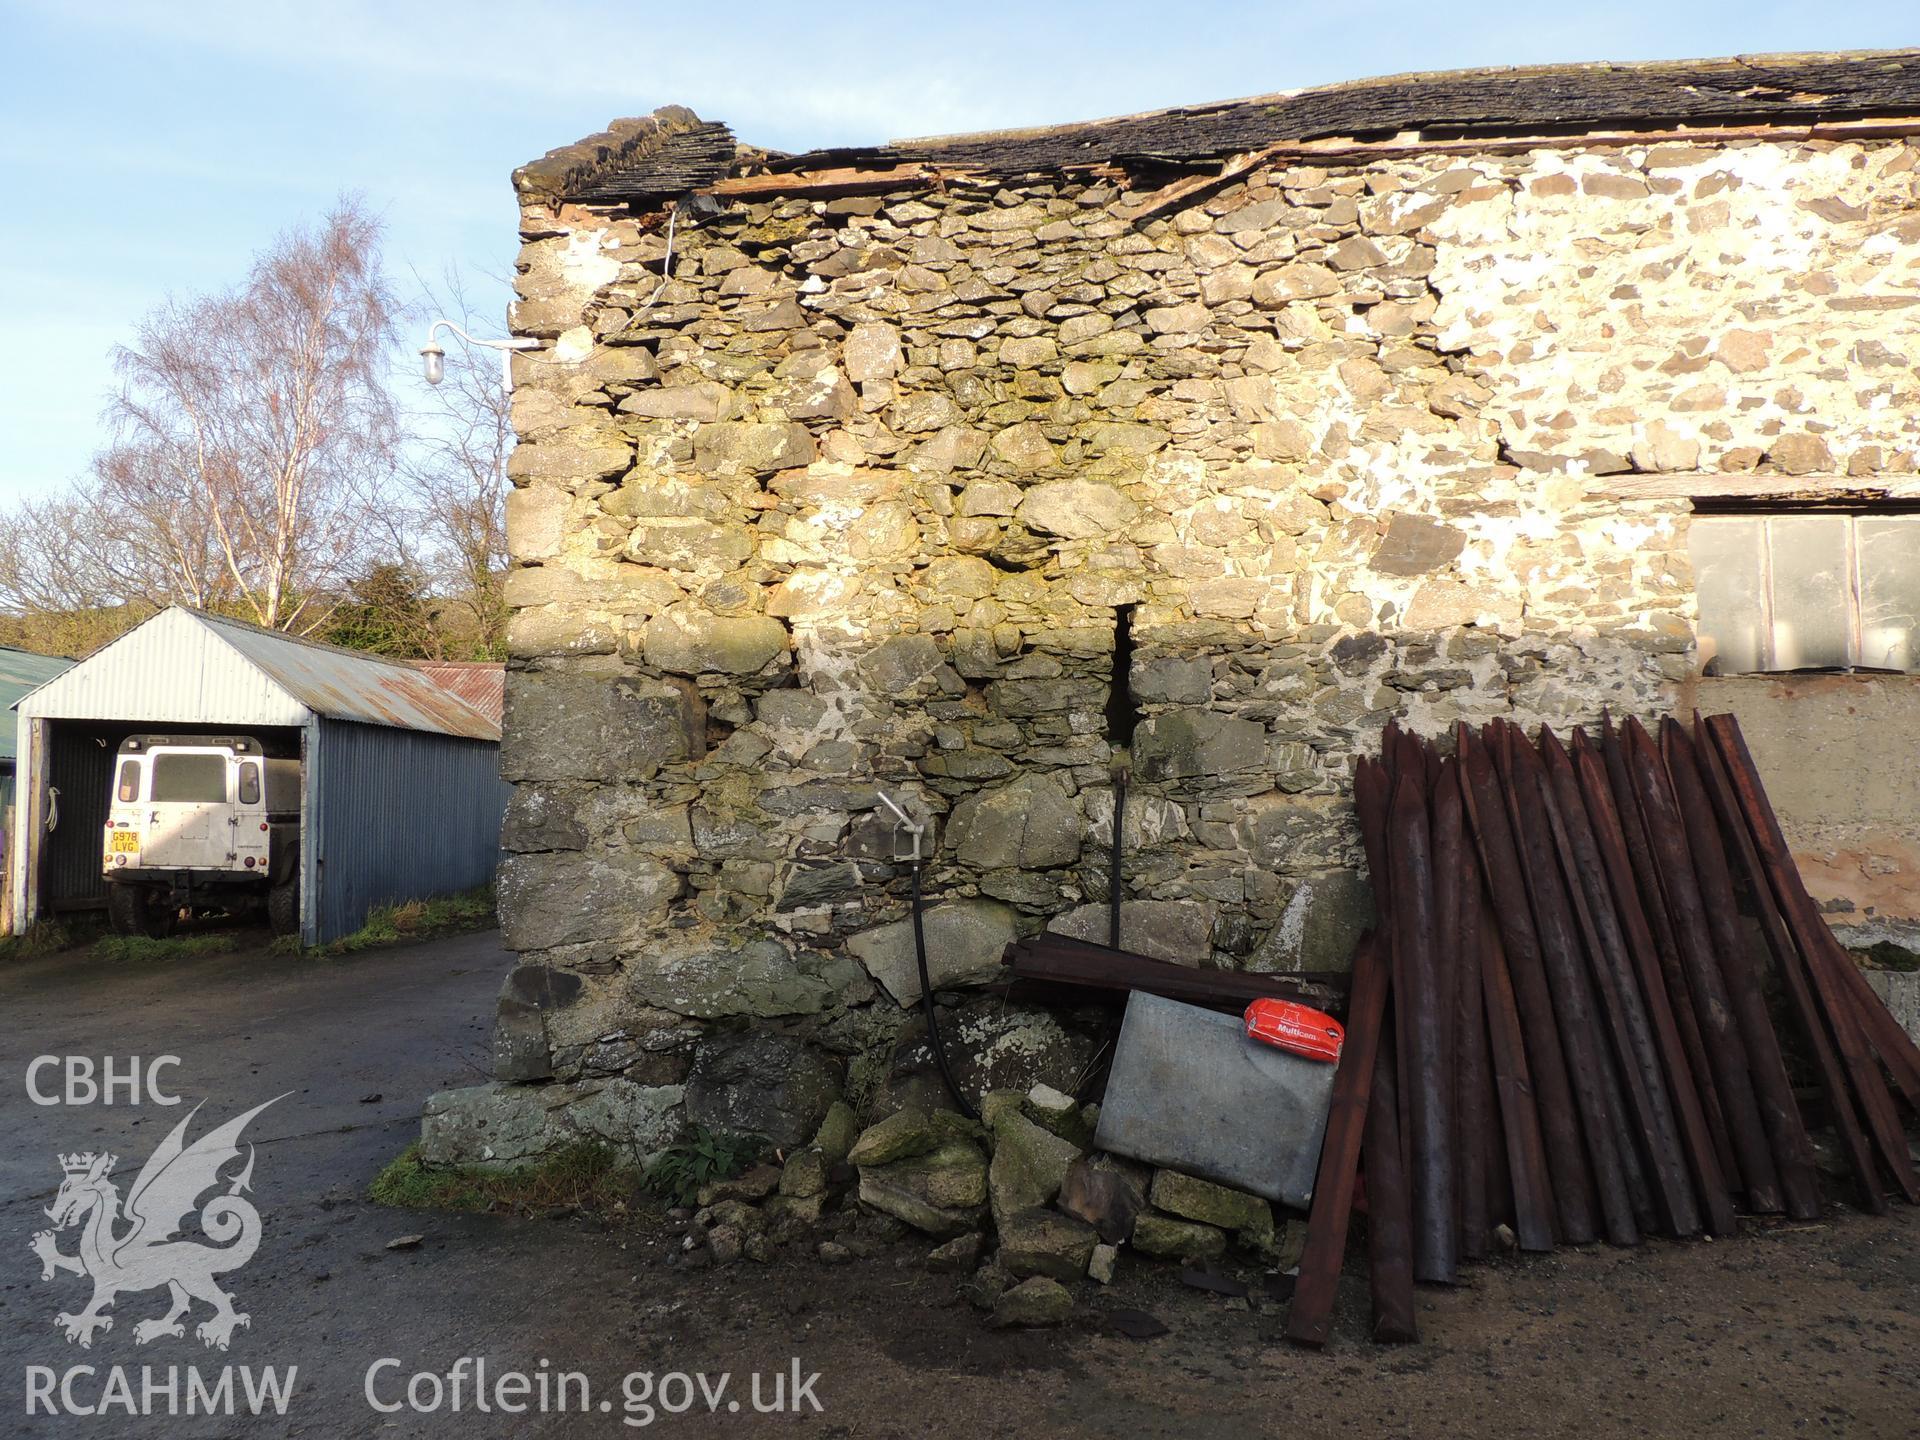 Quoins and ventilation slot, westernmost of front elevation. Photograph taken as part of archaeological building survey at Bryn Gwylan Threshing Barn, Llangernyw, Conwy, carried out by Archaeology Wales, 2017-2018. Report no. 1640. Project no. 2578.